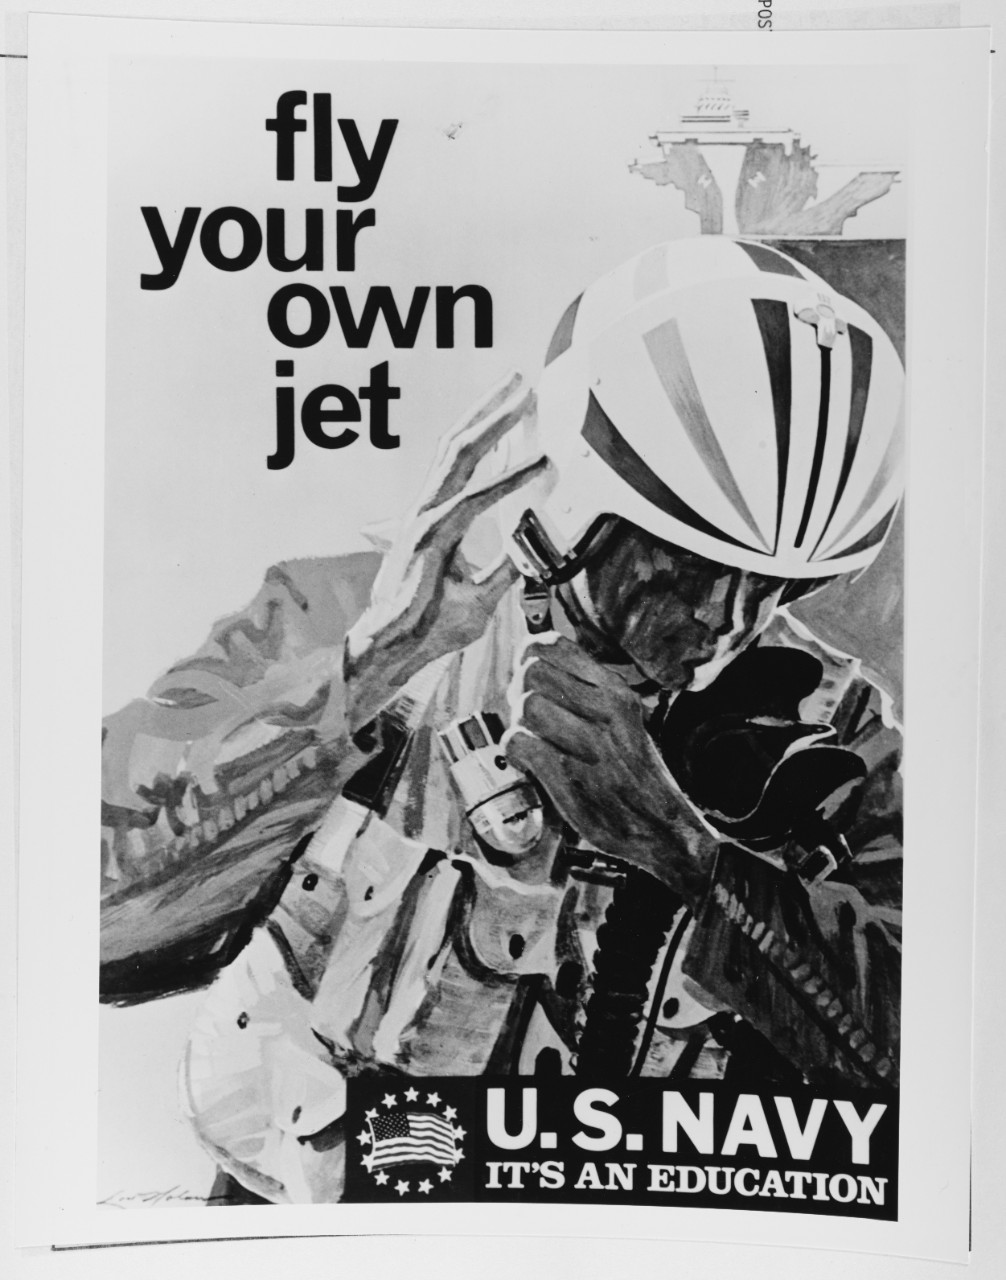 Navy recruiting poster:  "Fly your own jet"